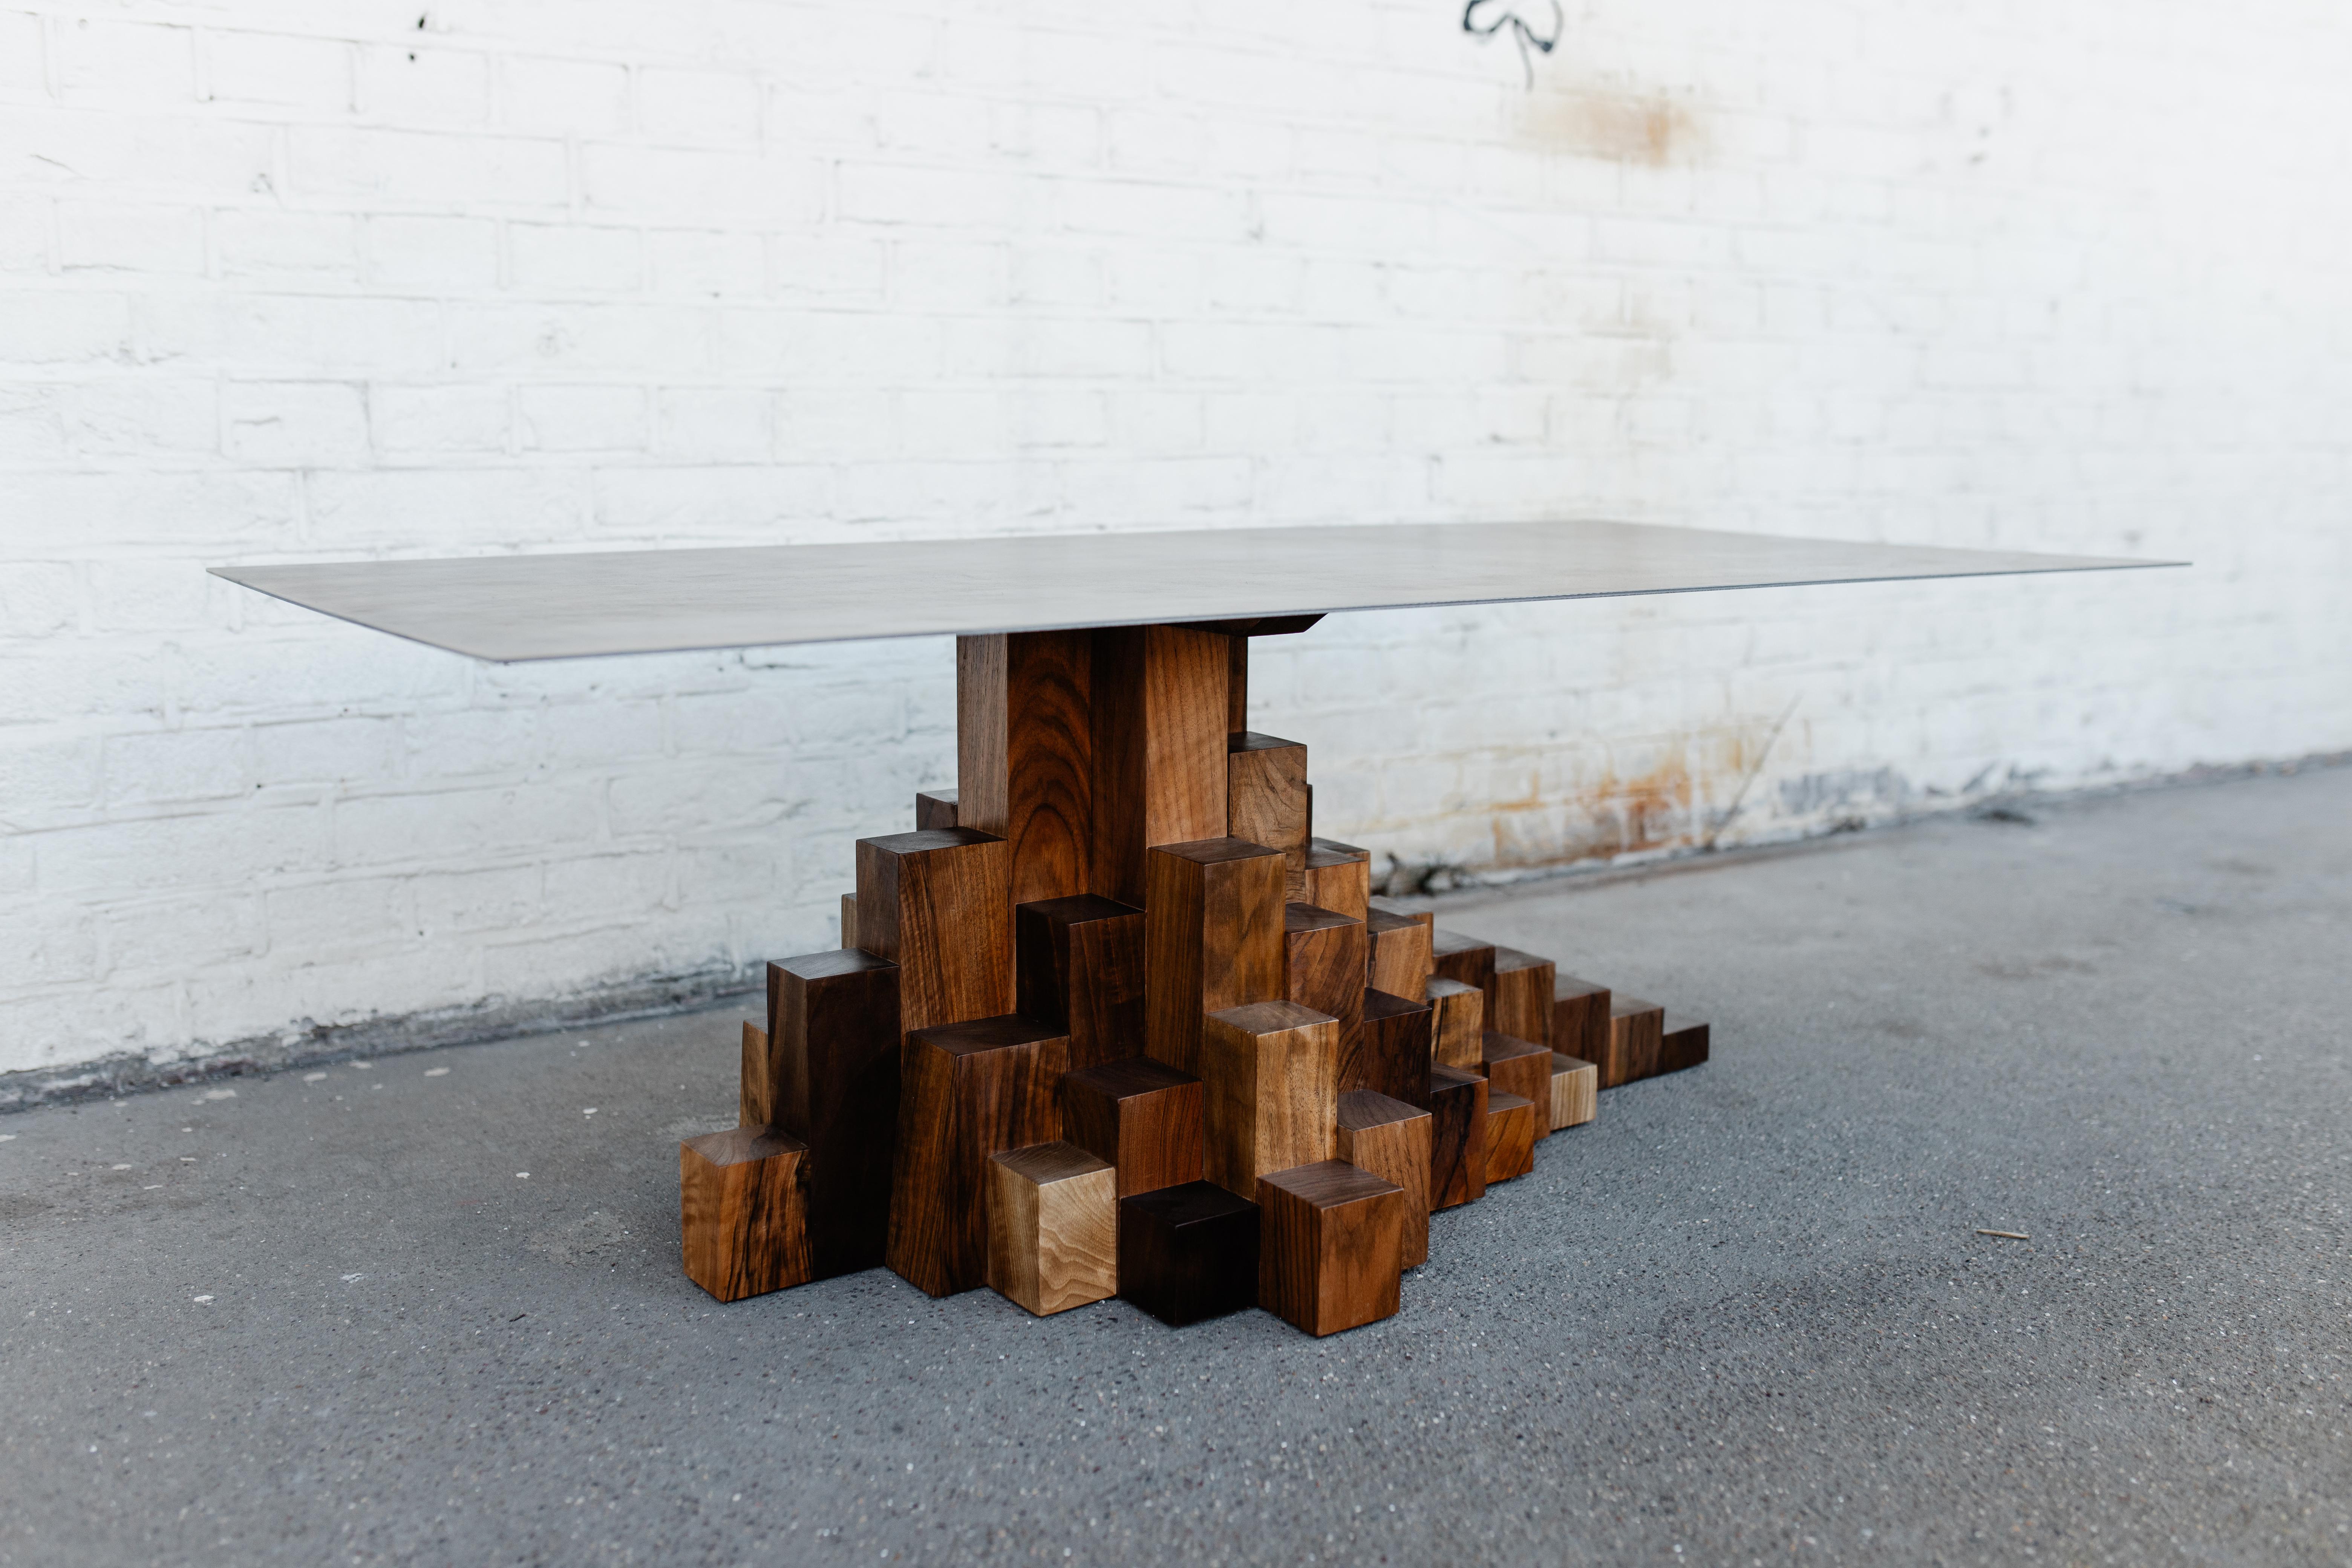 The Ahadi Coffee table is a sculptural brutalist piece. Inspired by nature, it is designed to resemble the strong, bold, strength of a Mountain. The Ahadi pieces are all functional art pieces, carrying both the characteristics of art and a piece of